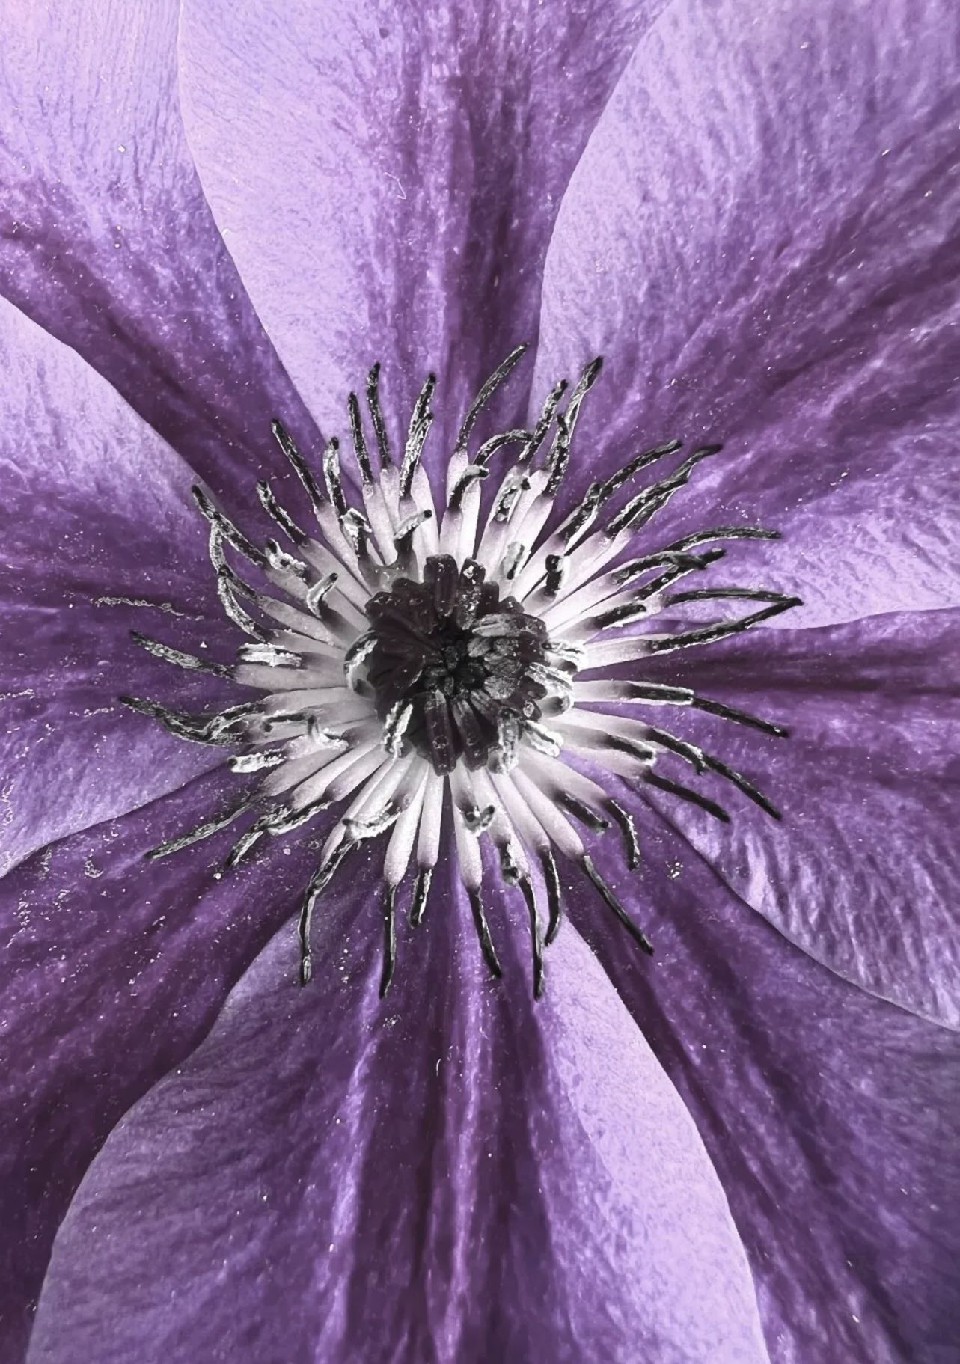 Eye of Clematis. 

Printed on high quality poster paper with a matt finish. 
All prints come framed in a frameless frame and are signed by the artist and are printed and made to order. 
Genuine Swarovski crystals can also be added to give each piece an added sparkle. 

All images are copyrighted. The use of reprinting of any image from this site is prohibited unless prior written permission from the artist is obtained.